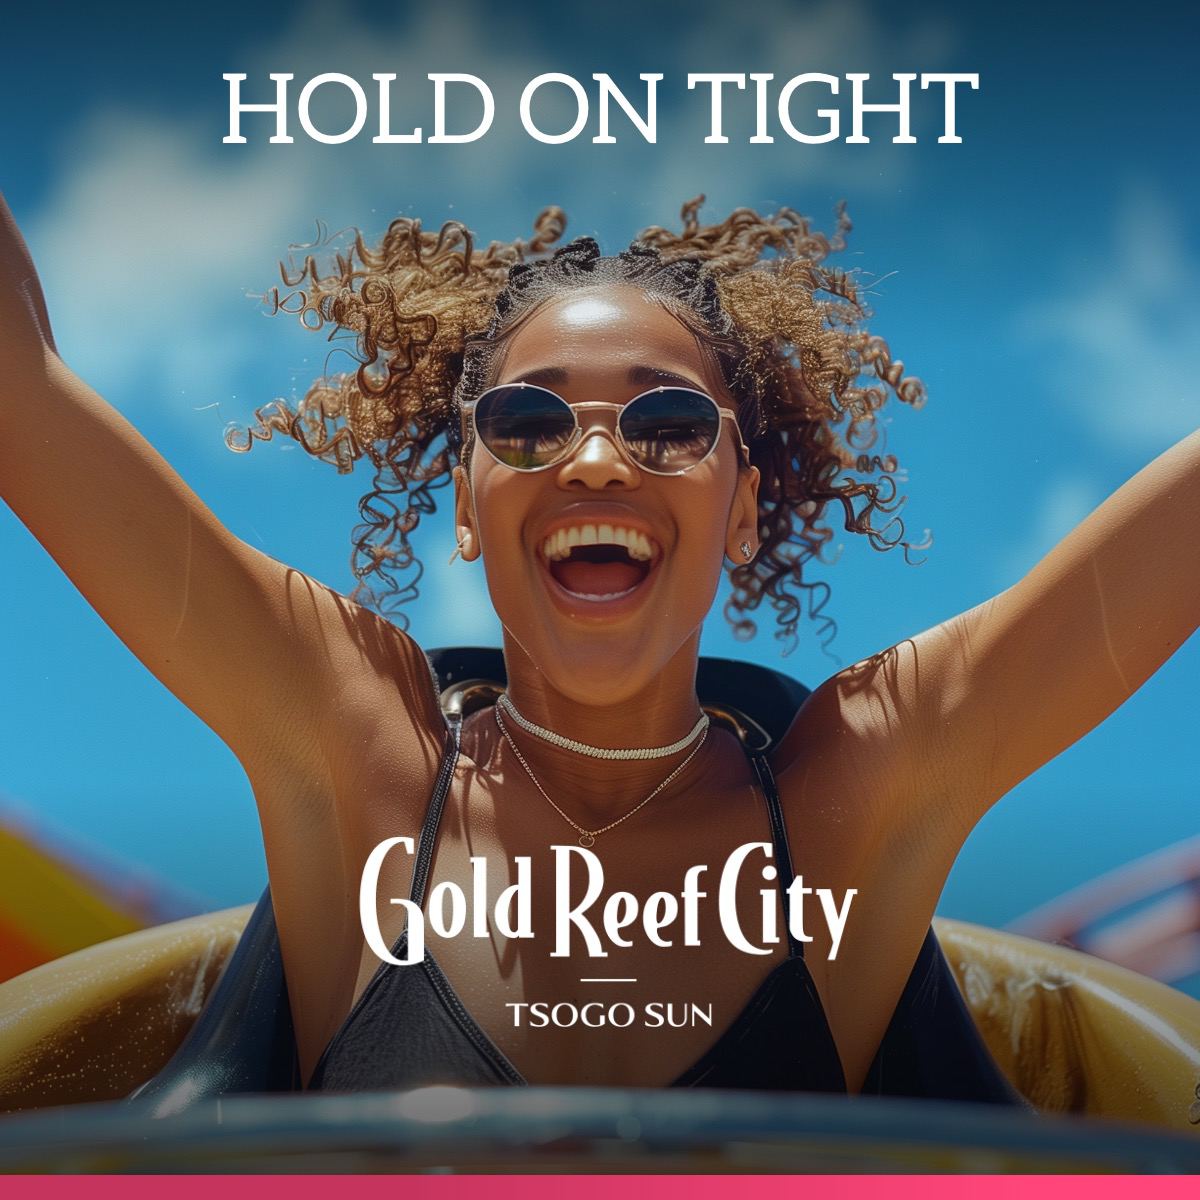 The twists and turns of our rides will have you holding on tight for dear life. High speeds and dizzying heights are all part of the thrill - all day access for R265pp to scream and have fun to your heart’s content. Book online only at goldreefcity.co.za